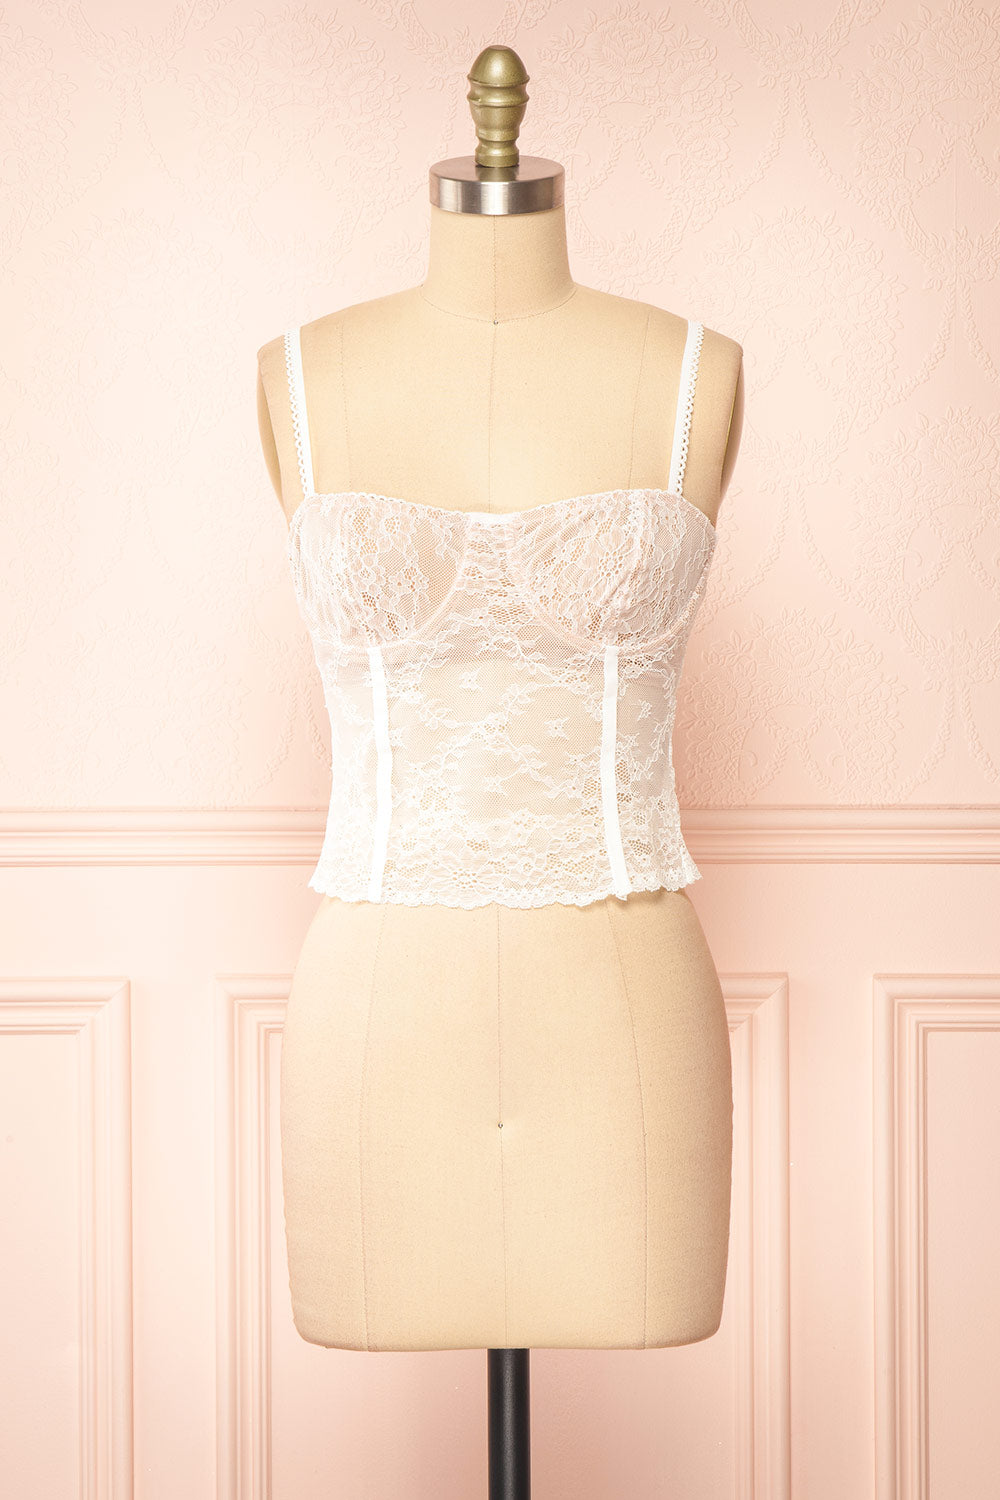 Lace Bustier Crop Top - White